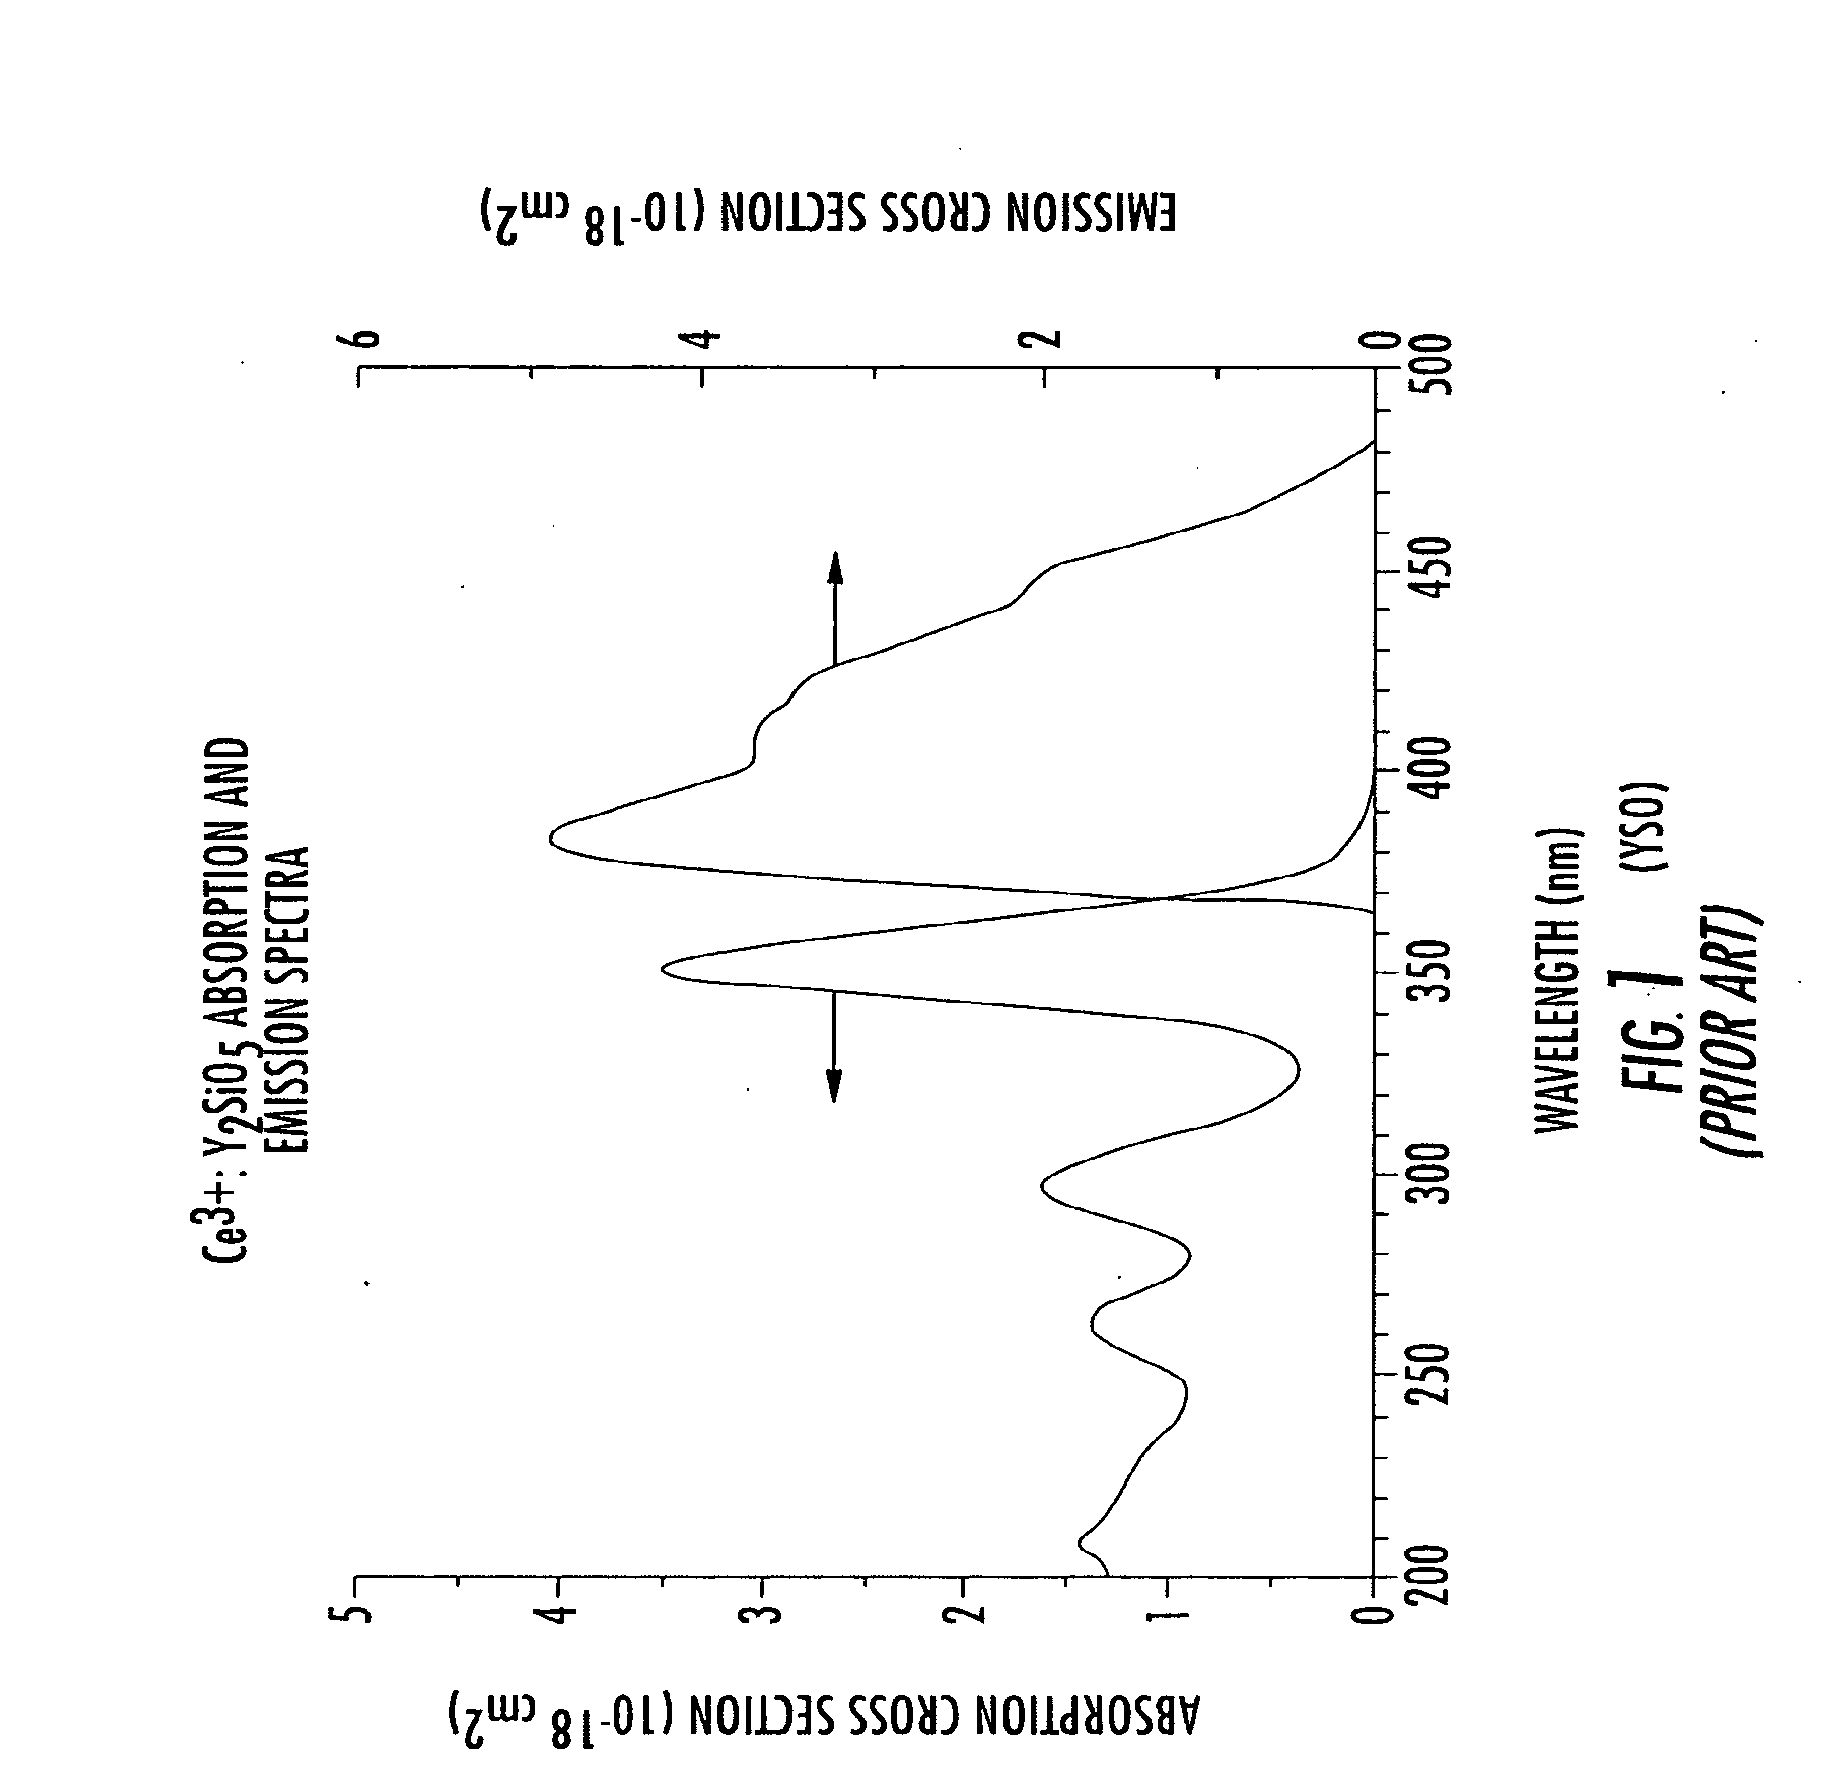 Method of enhancing performance of cerium doped lutetium orthosilicate crystals and crystals produced thereby